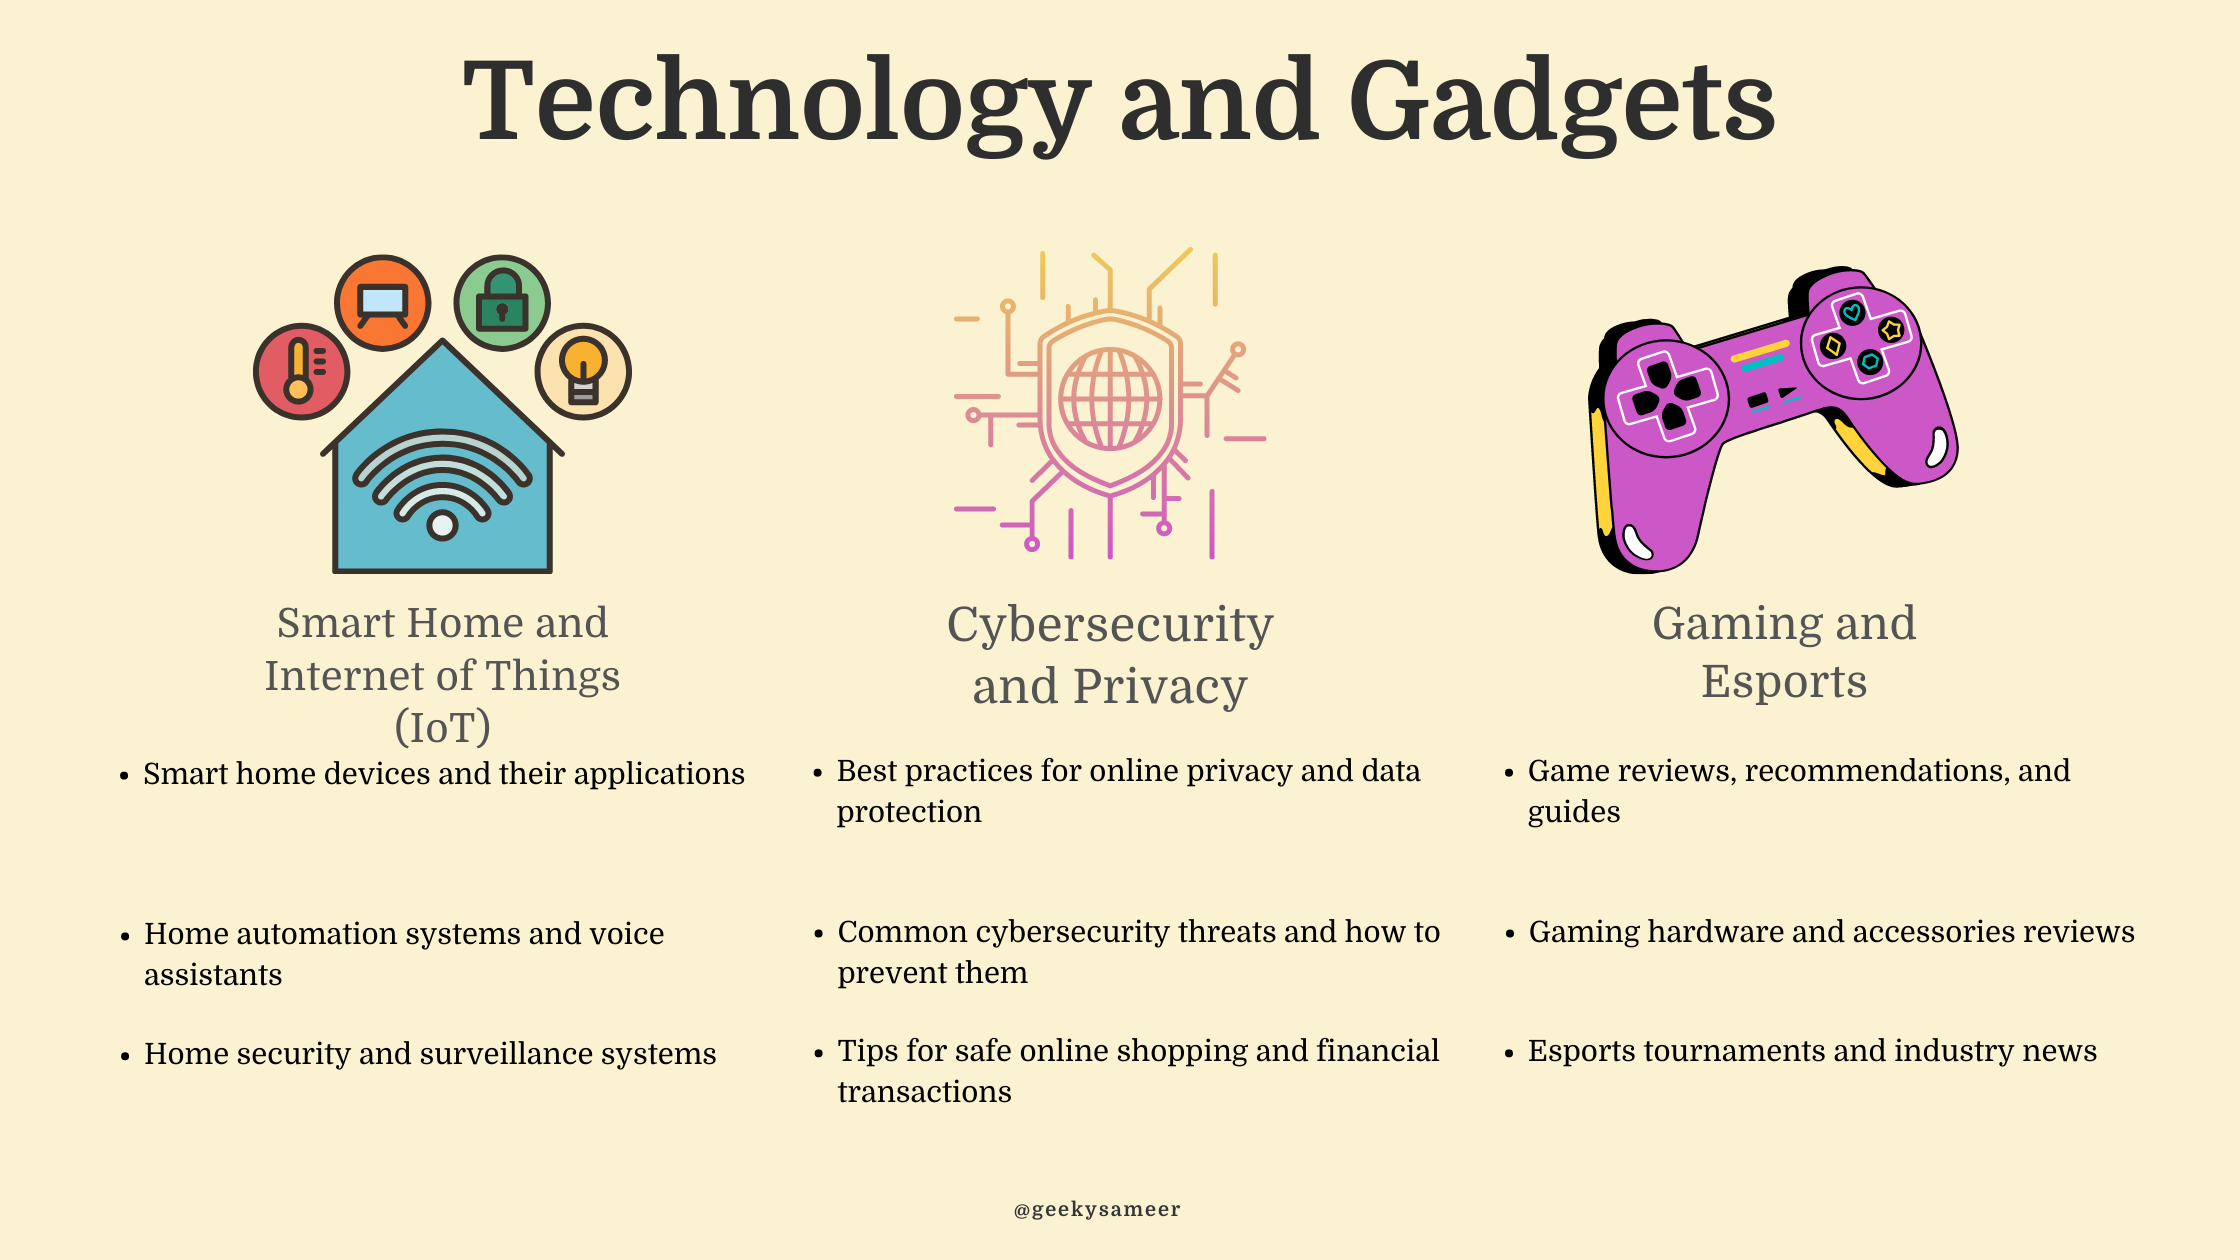 blogging niches in Technology and Gadget